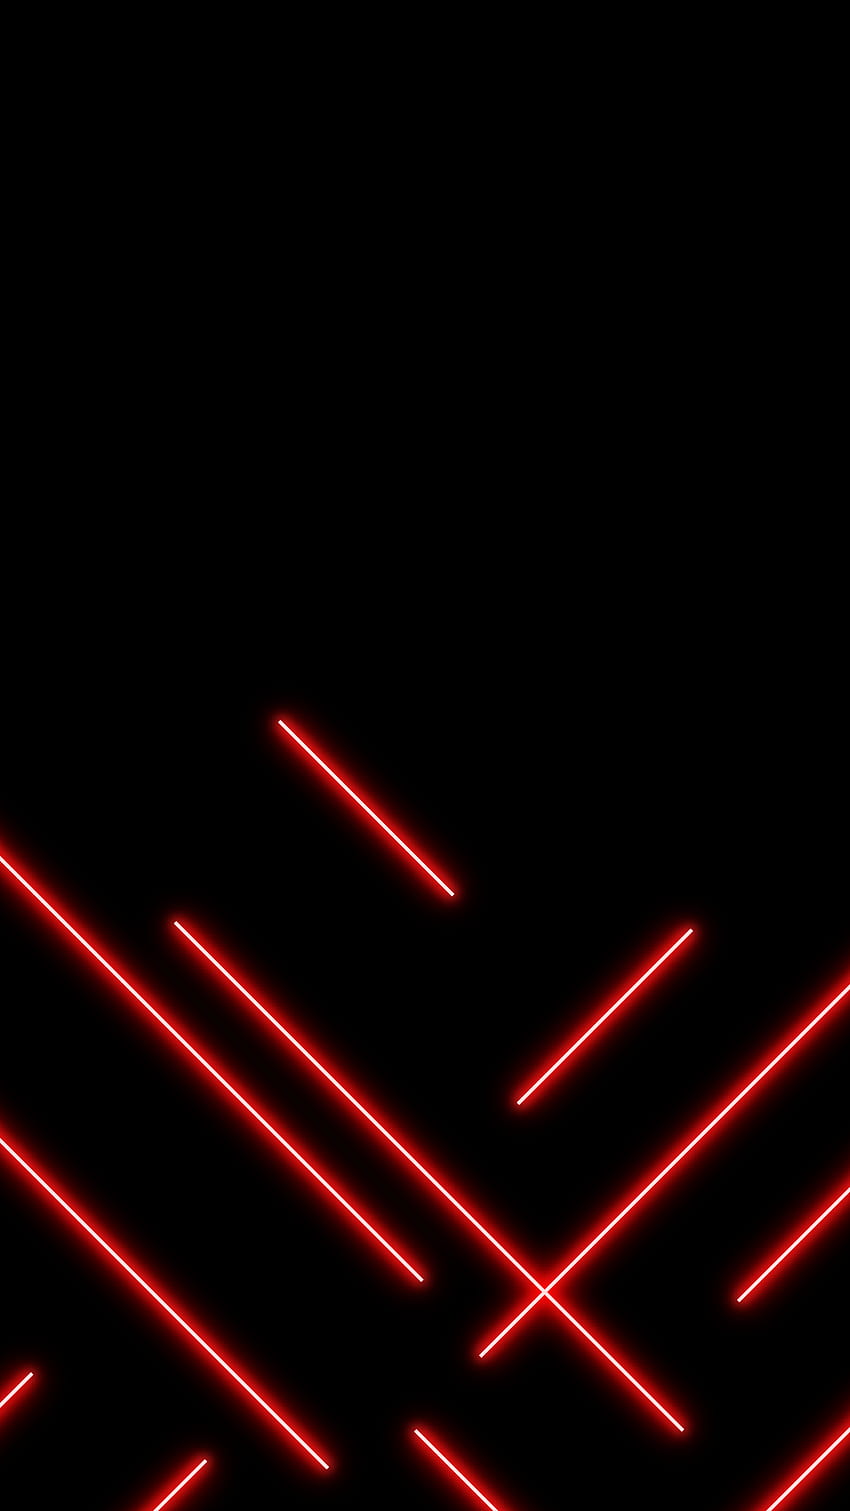 Black and Red Amoled Phone - For Tech, Red Lightning HD phone wallpaper